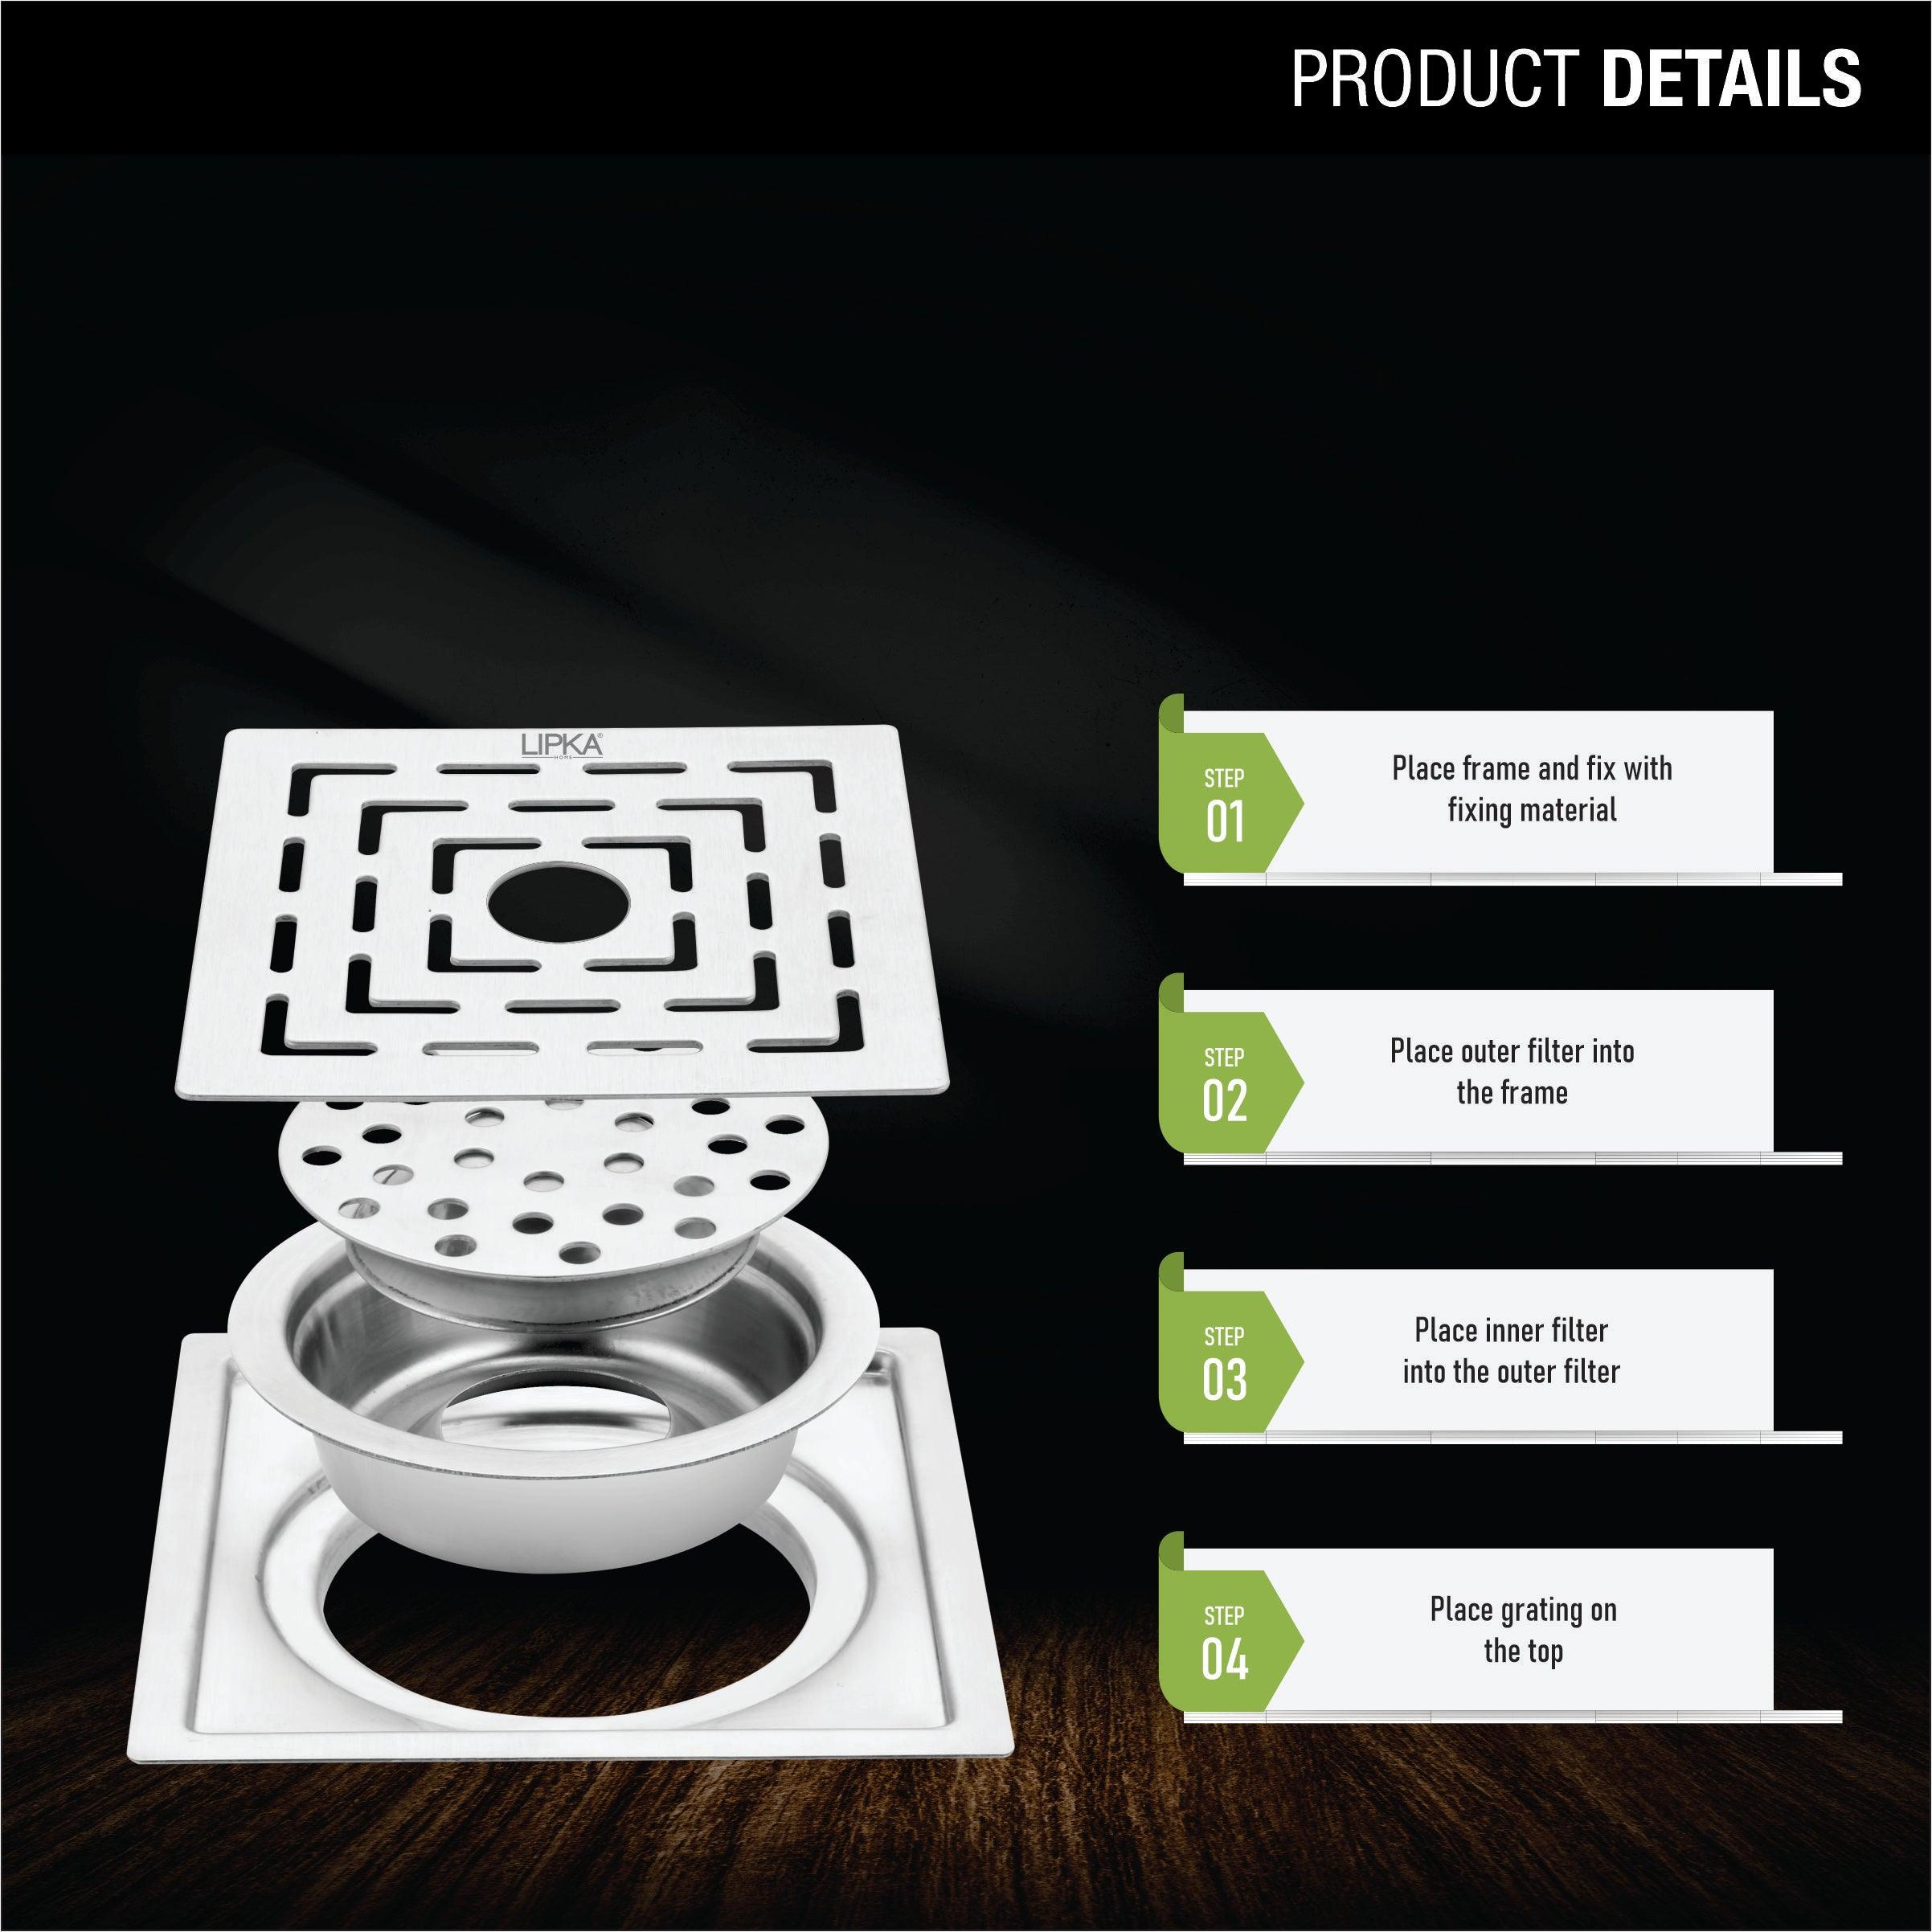 Orange Exclusive Square Flat Cut Floor Drain (6 x 6 Inches) with Hole and Cockroach Trap product details